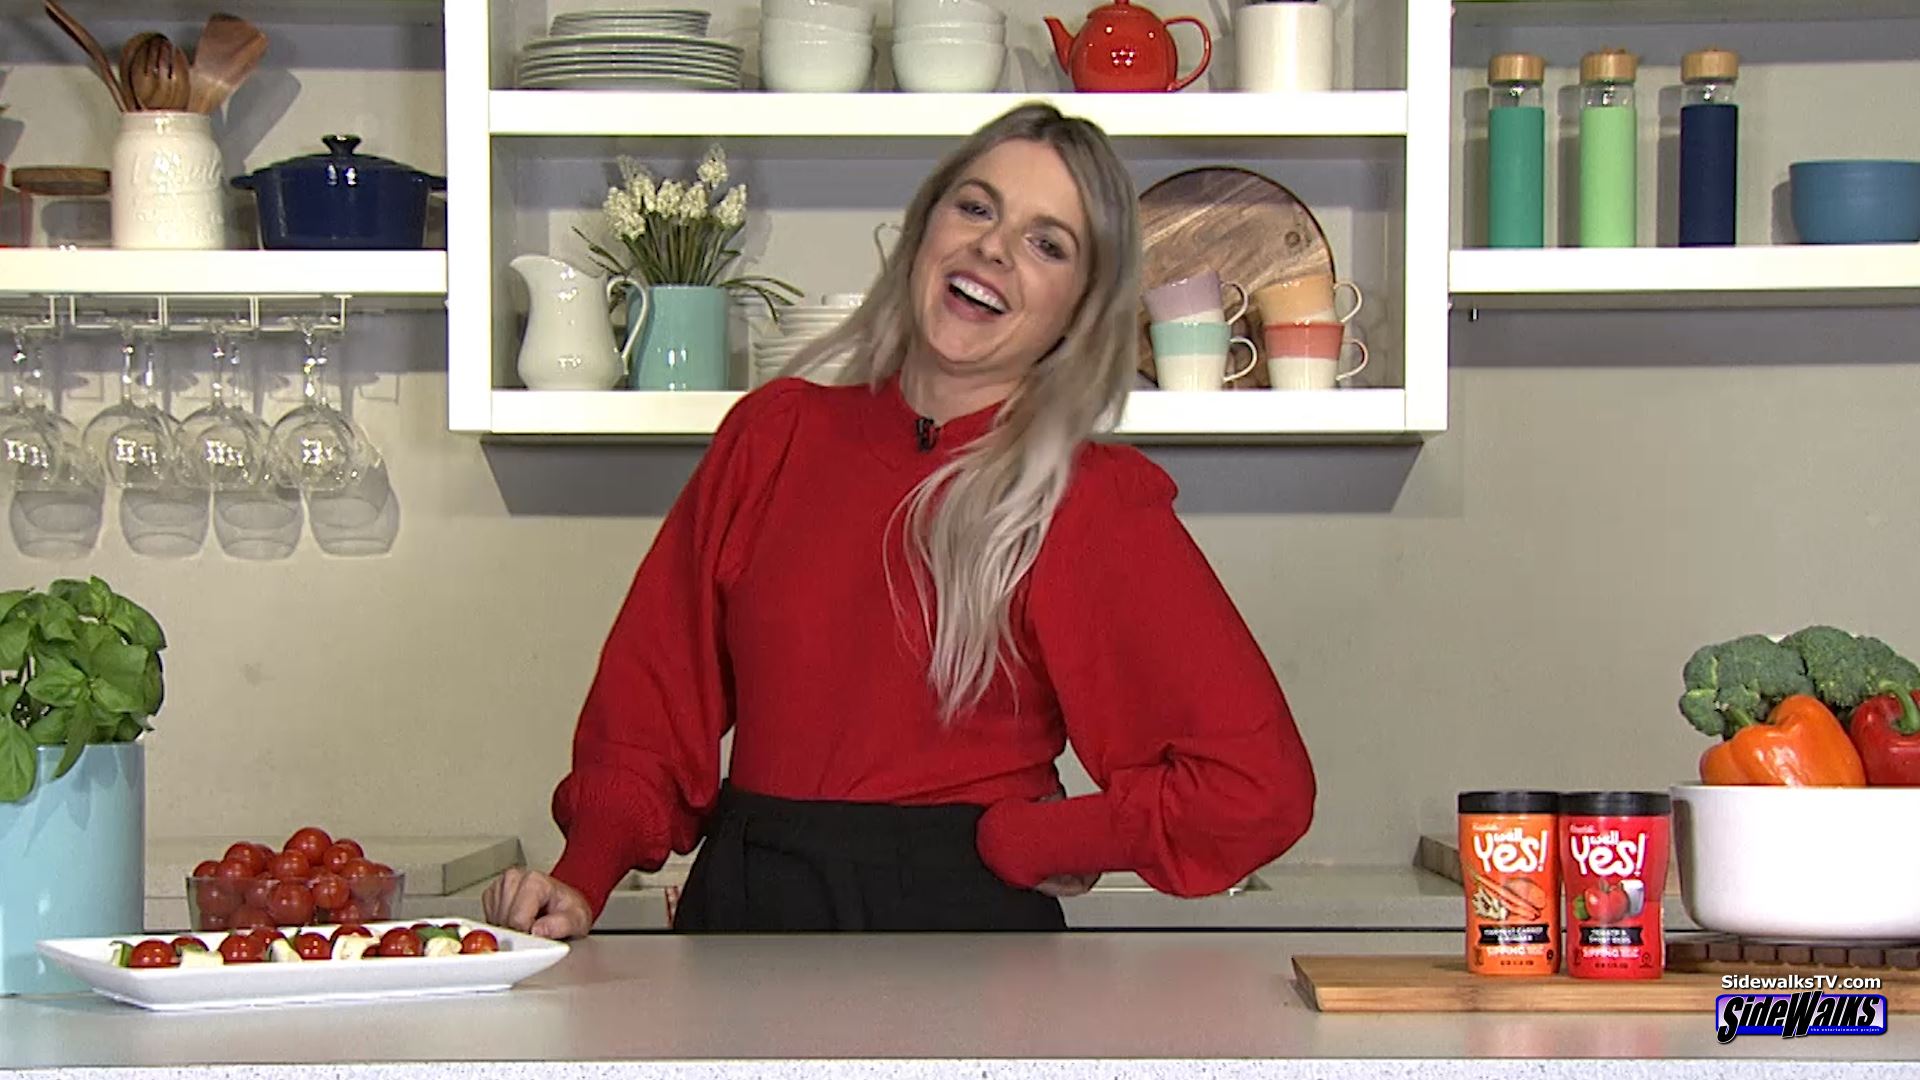 Ali Fedotowsky-Manno appears on our TV show